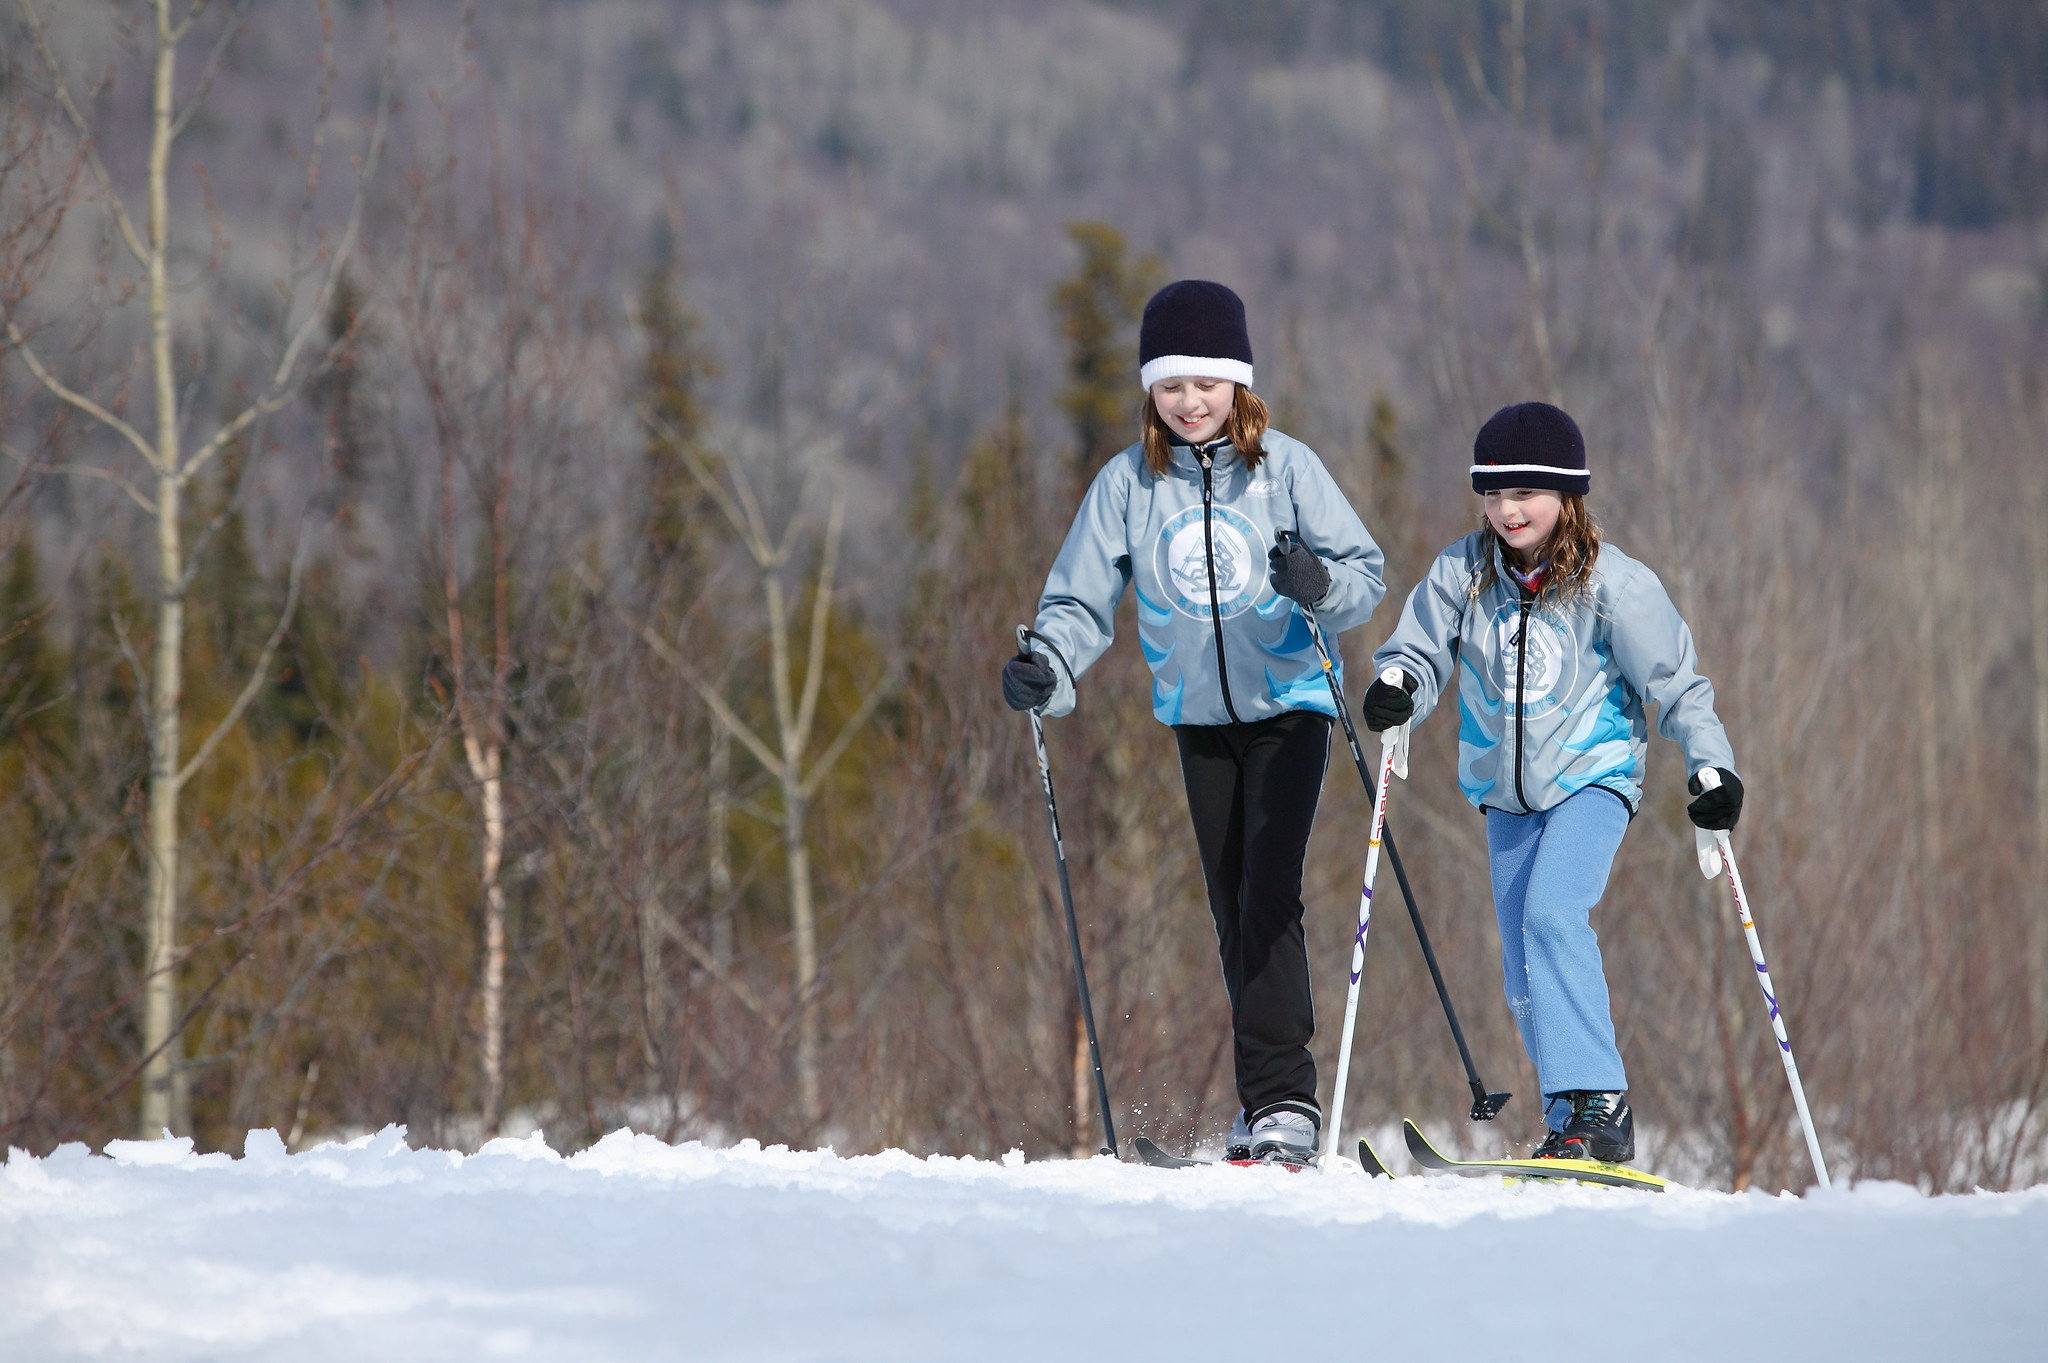 Two children cross-country ski through an open field, with woods in the distance. (photo © Province of British Columbia via the Flickr Creative Commons)